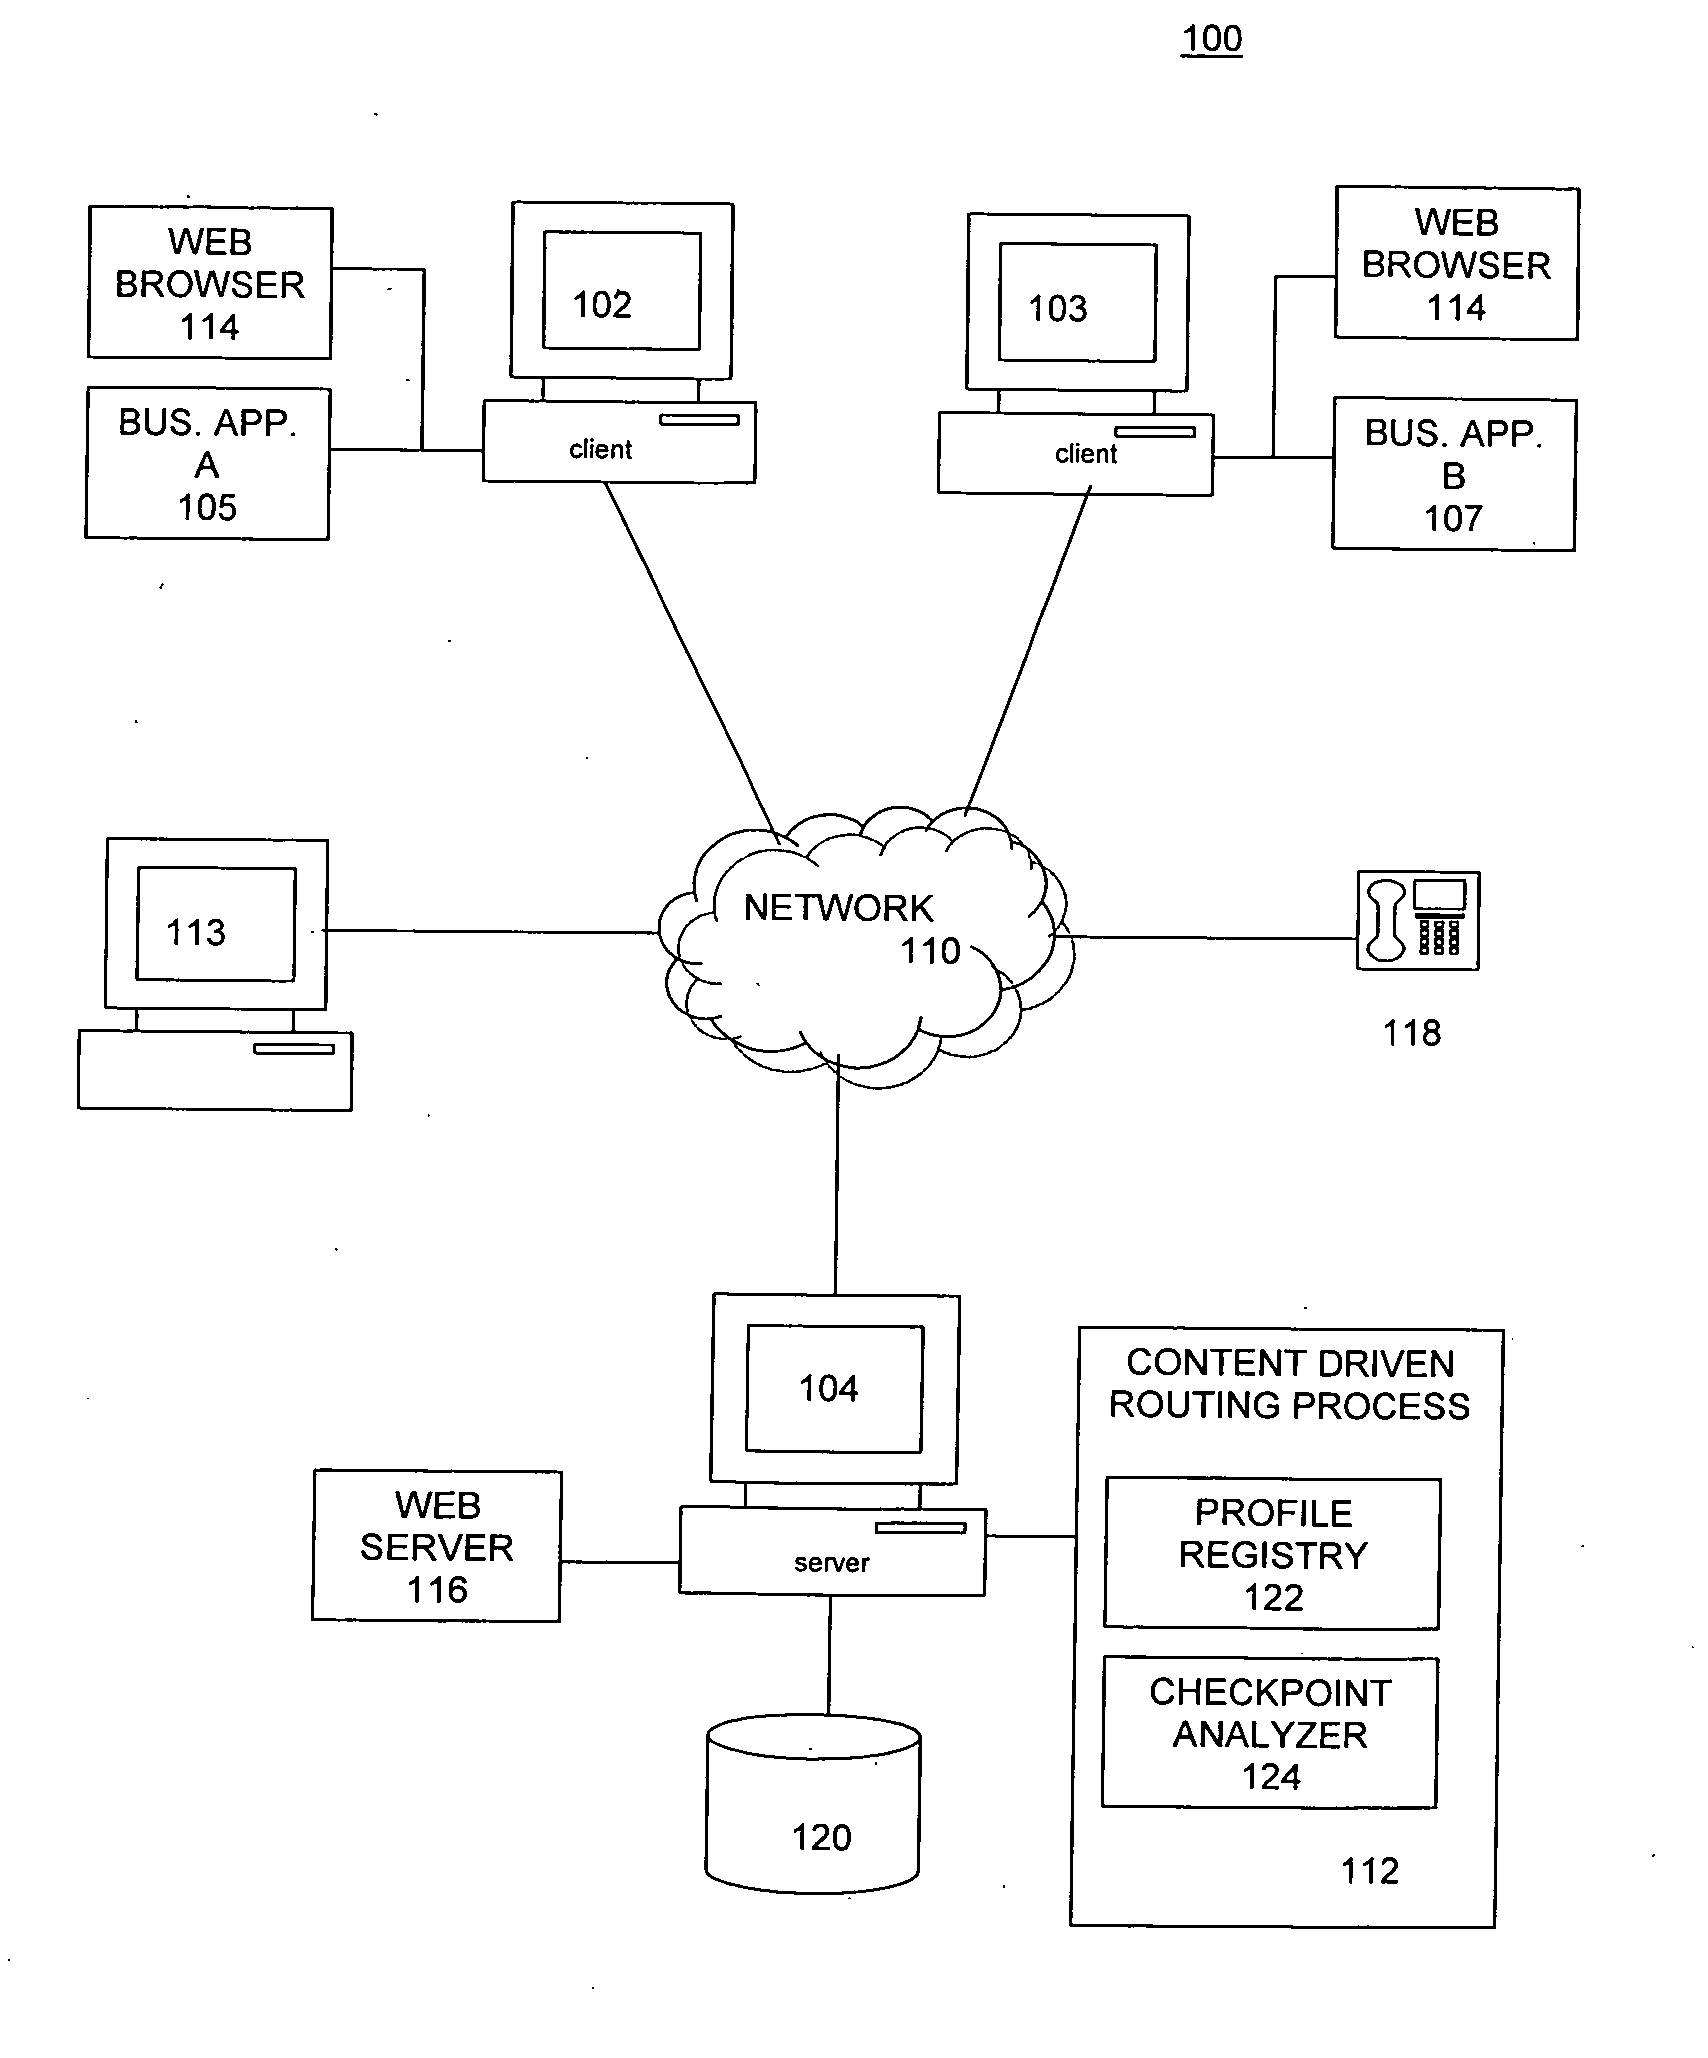 Content driven process routing for integrated enterprise applications